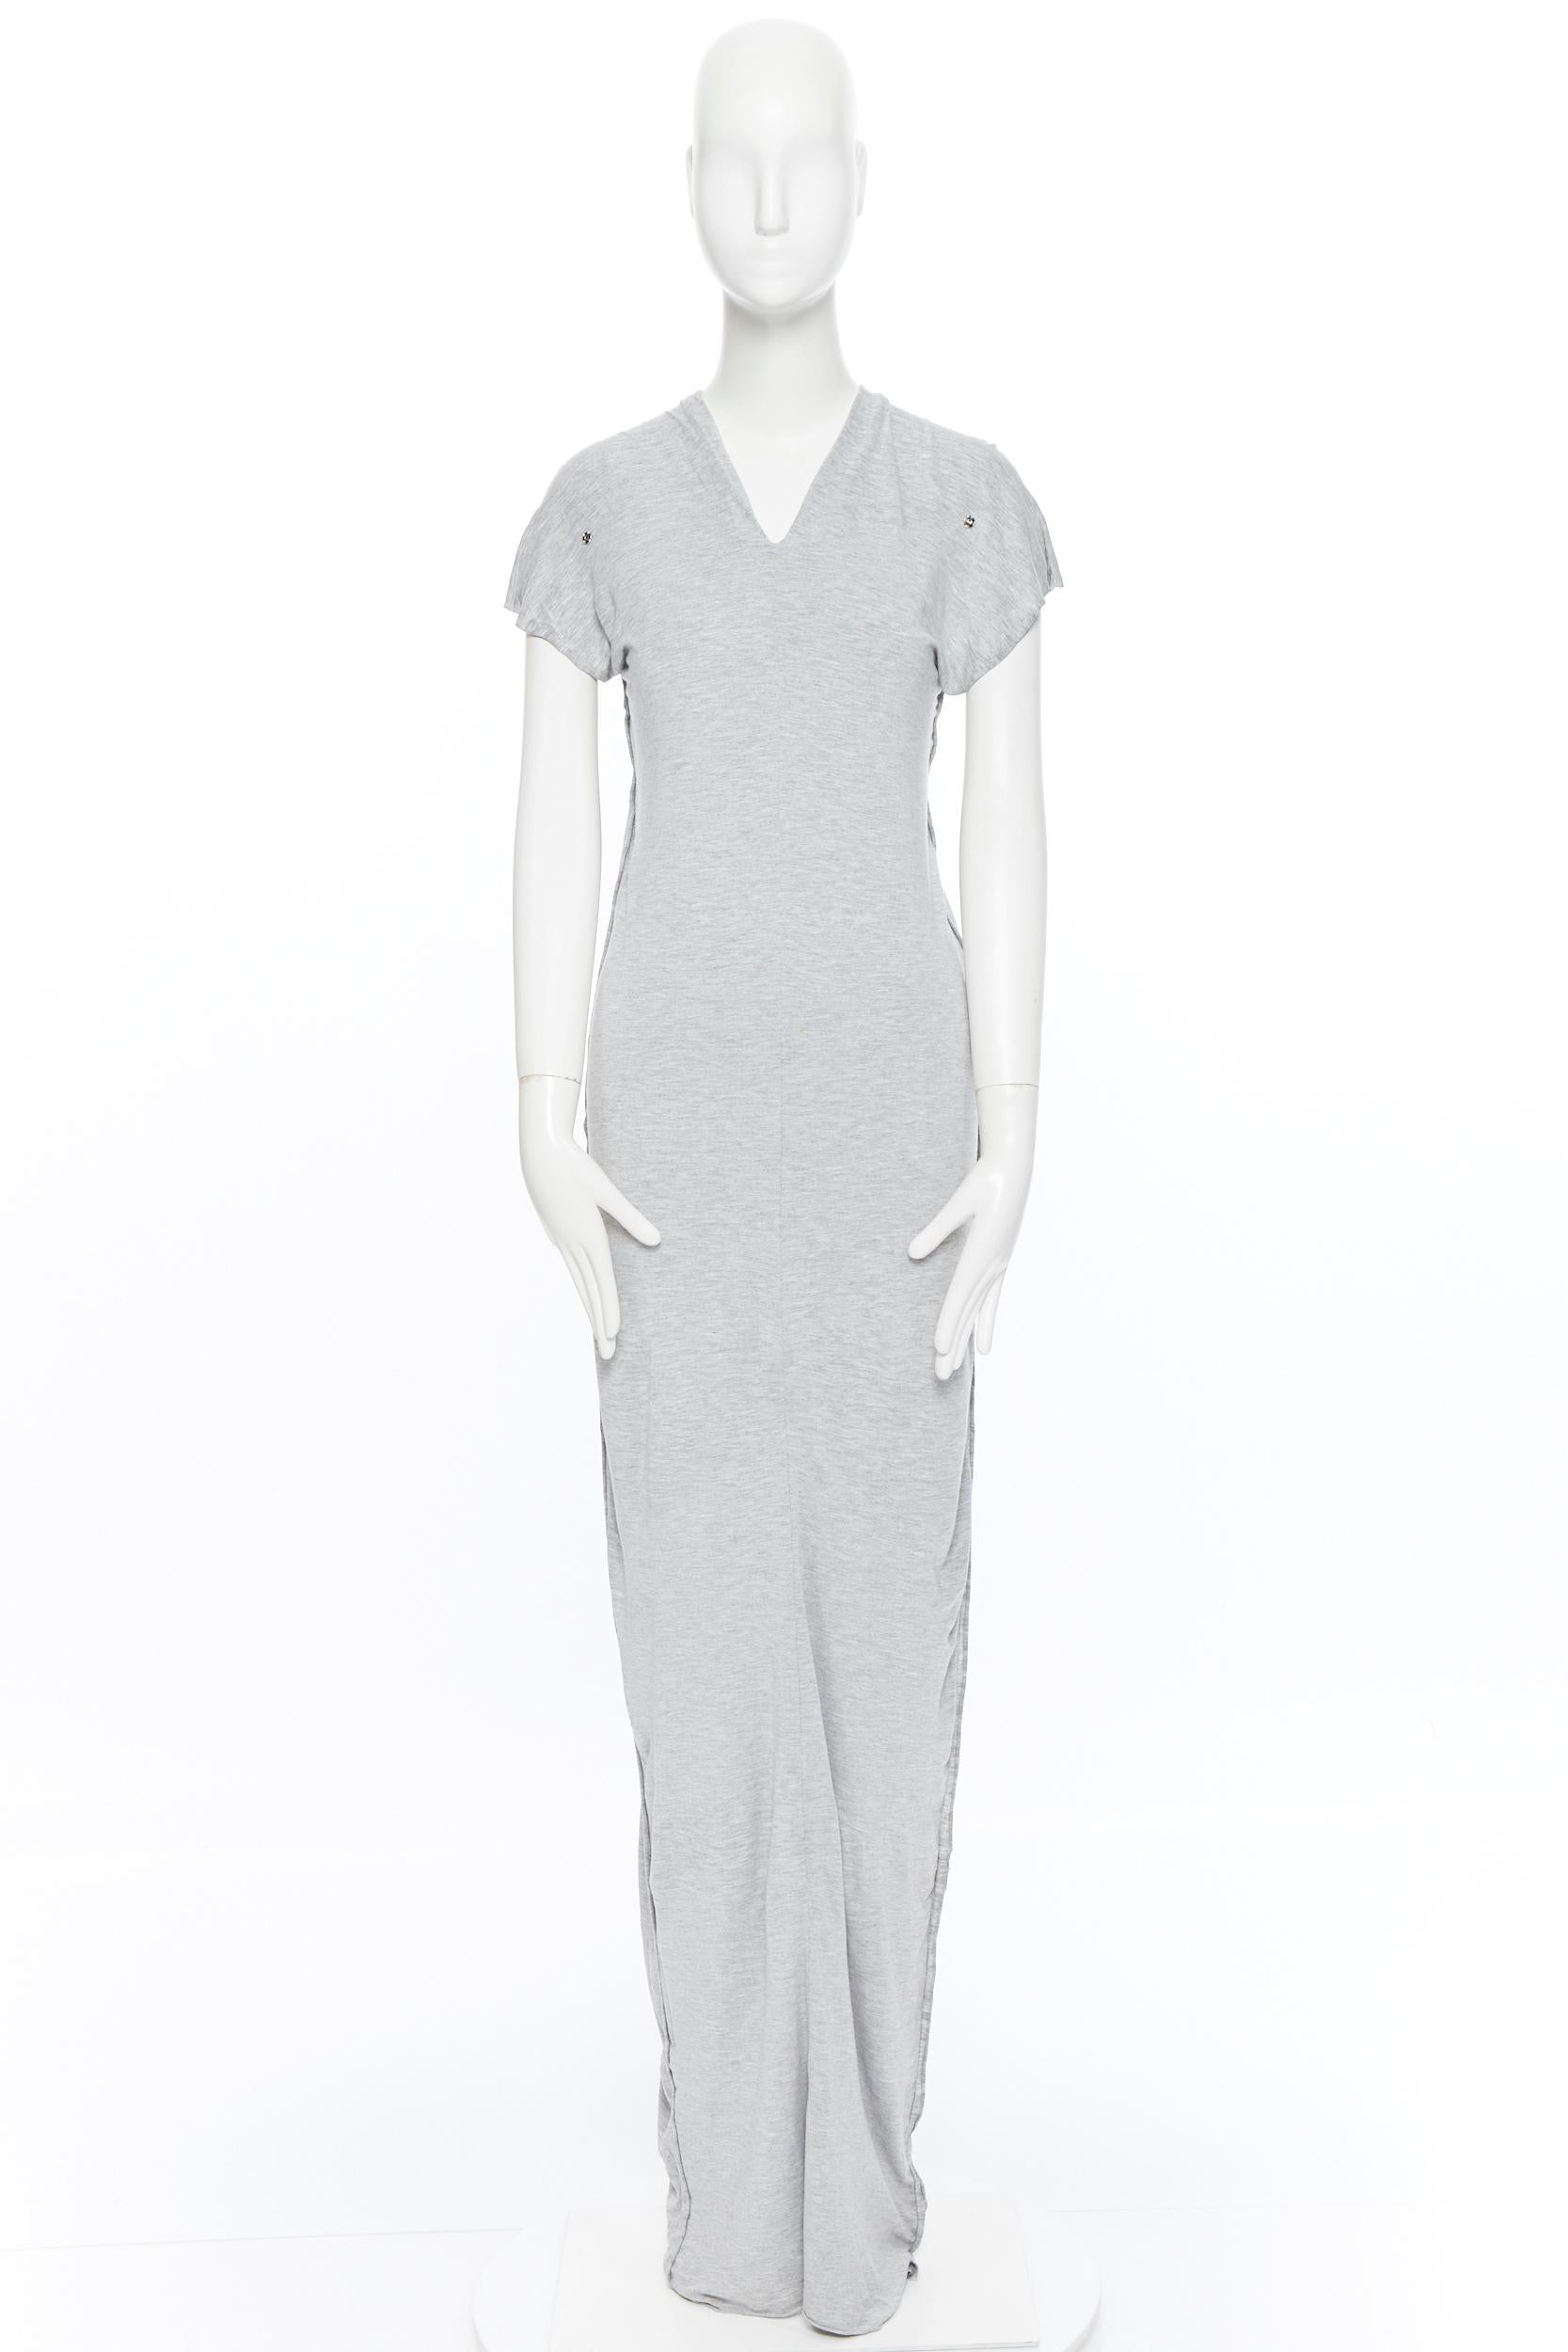 MAISON MARGIELA AW1998 Flat grey cotton raw cut sleeve snap button maxi dress 
Brand: Maison Margiela
Designer: Maison Margiela
Collection: AW1998
Model Name / Style: Casual dress
Material: Cotton
Color: Grey
Pattern: Solid
Extra Detail: Decorative